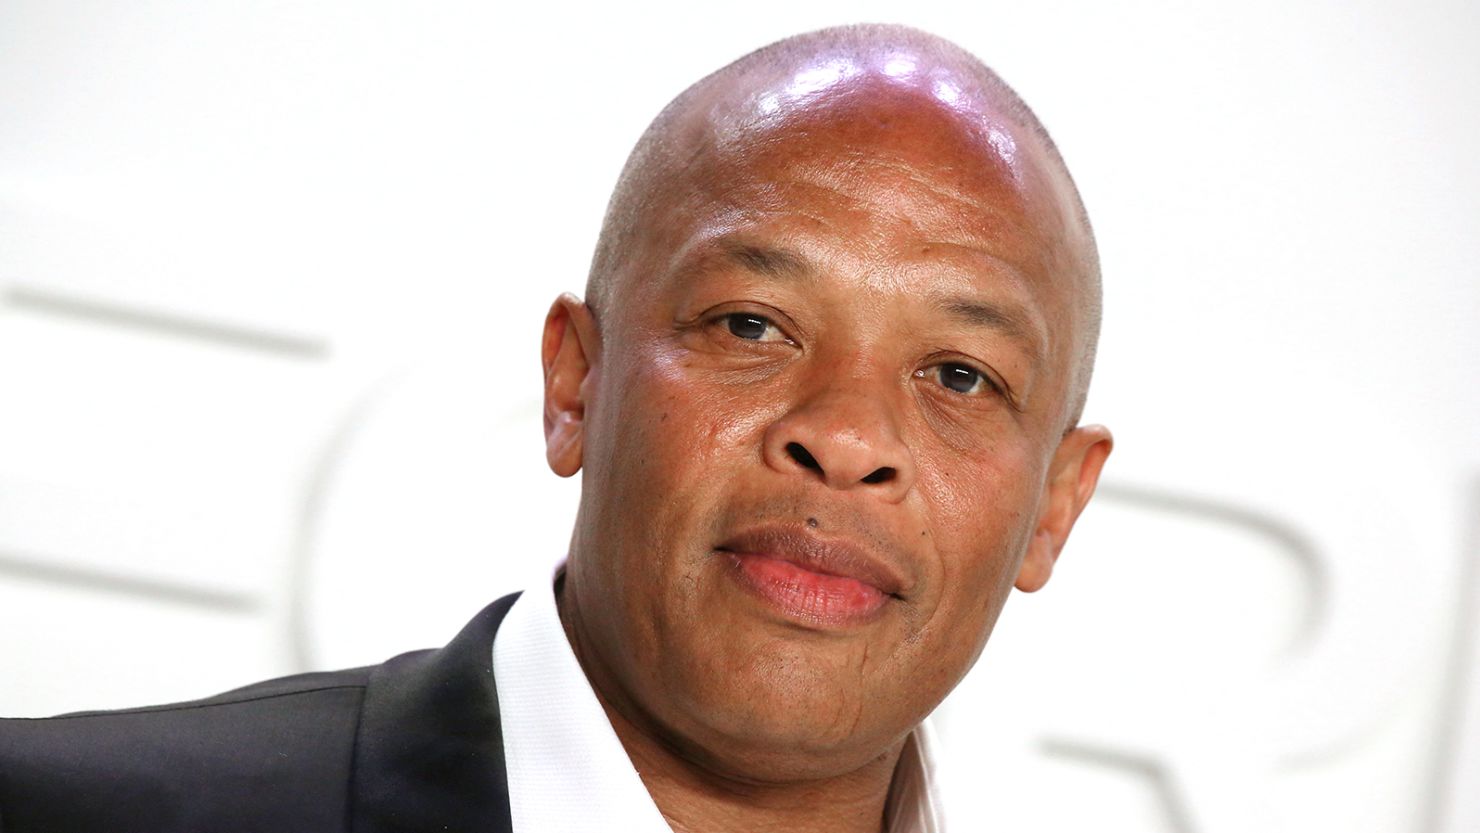 Dr. Dre is back home after being hospitalized for more than a week in Los Angeles, his attorney Peter Paterno told CNN.